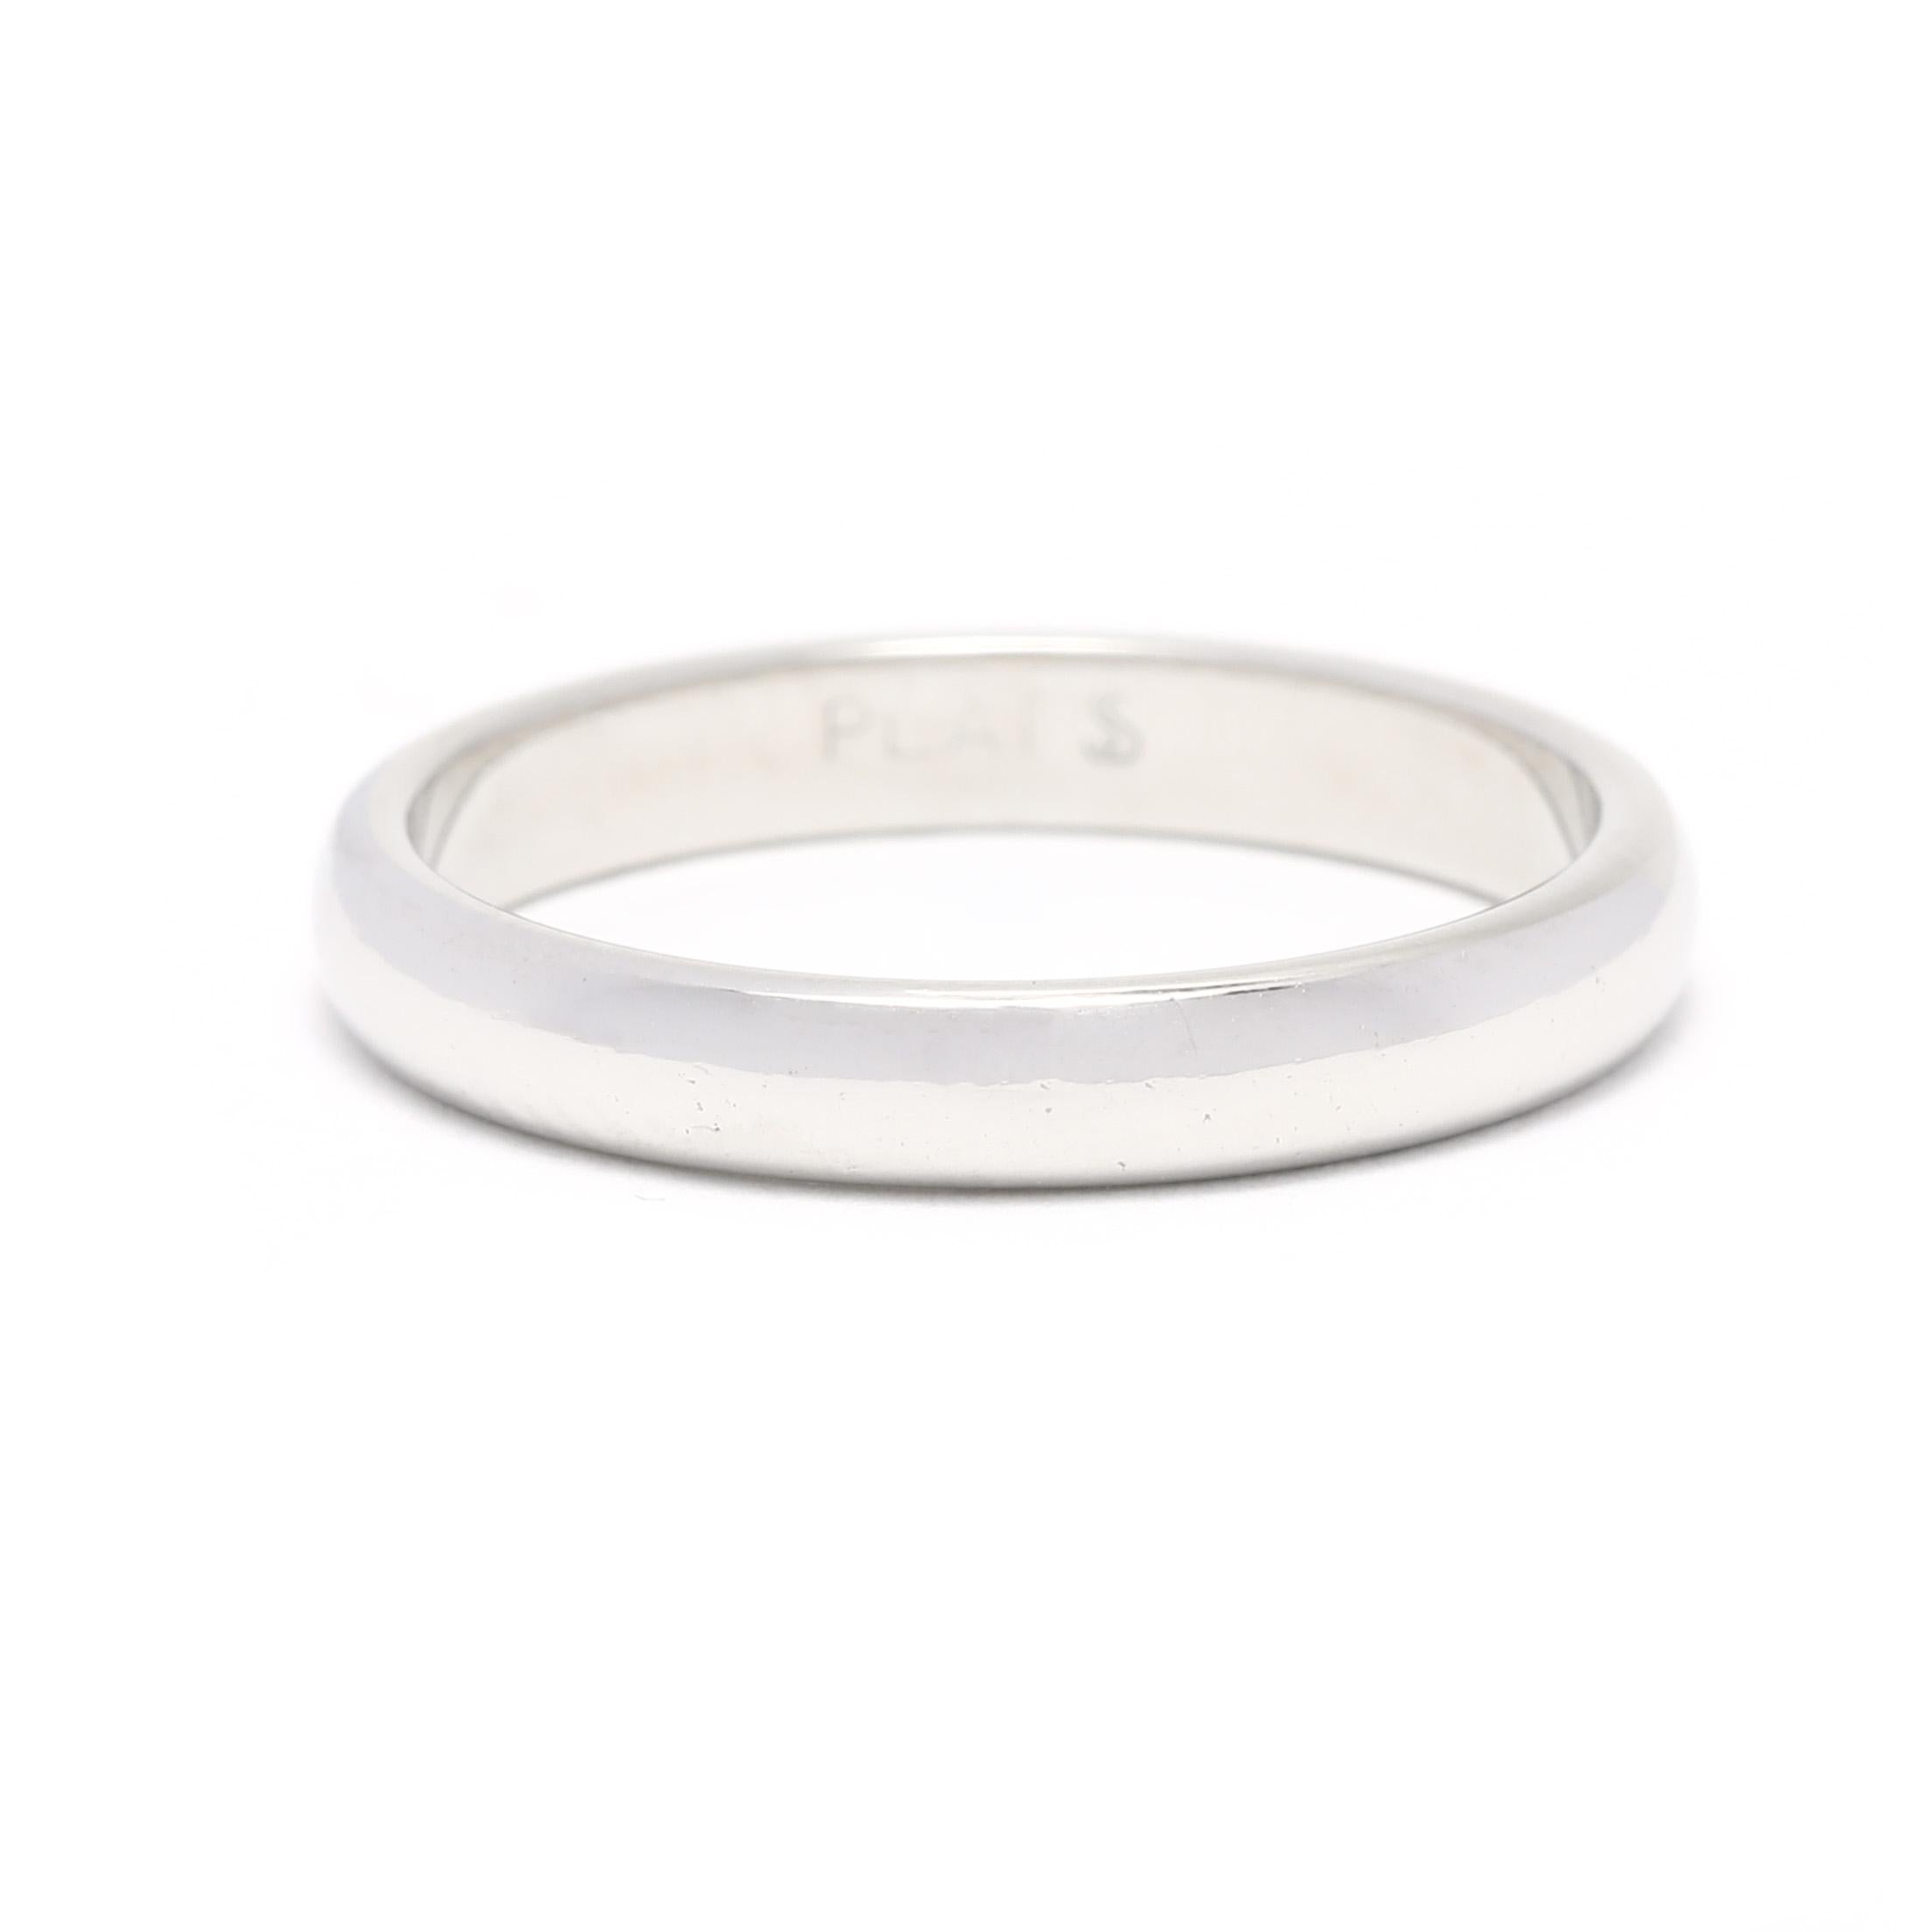 This 2.5mm plain wedding band is a perfect symbol of love and commitment. The band is crafted from Platinum, ensuring its durability and preciousness. The ring is a size 4 and features a simple yet elegant design, perfect for those who are looking